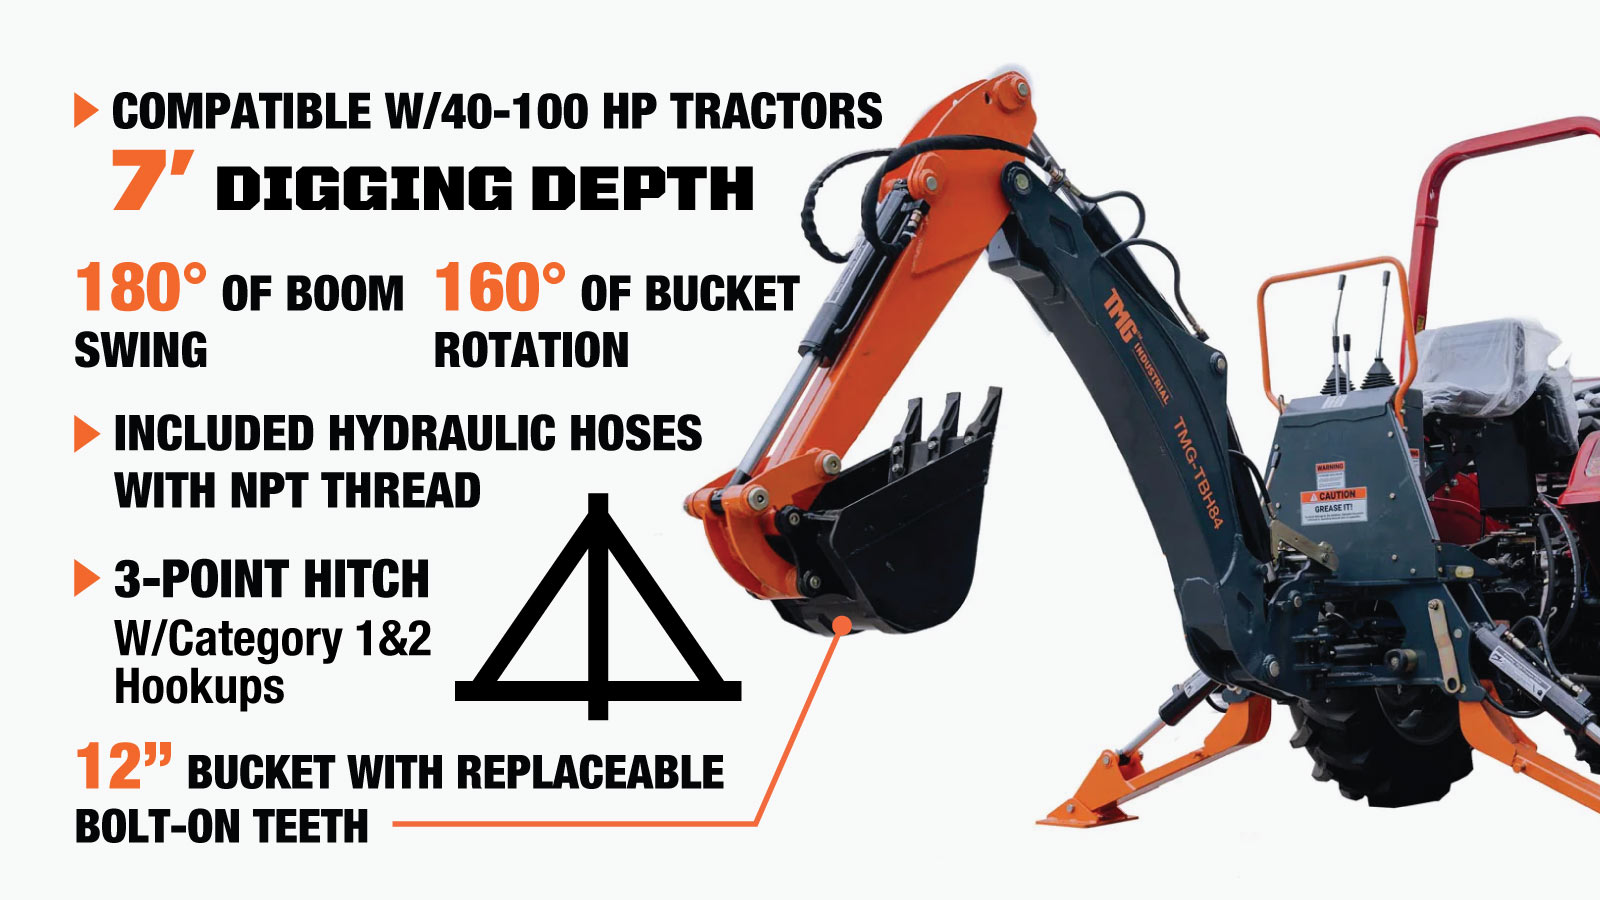 TMG Industrial 7-FT 3-Point Hitch Swing Backhoe Attachment, 12” Bucket Included, 40-100 HP Tractor, 126” High Reach, Category 1 & 2 Hookups, TMG-TBH84-description-image